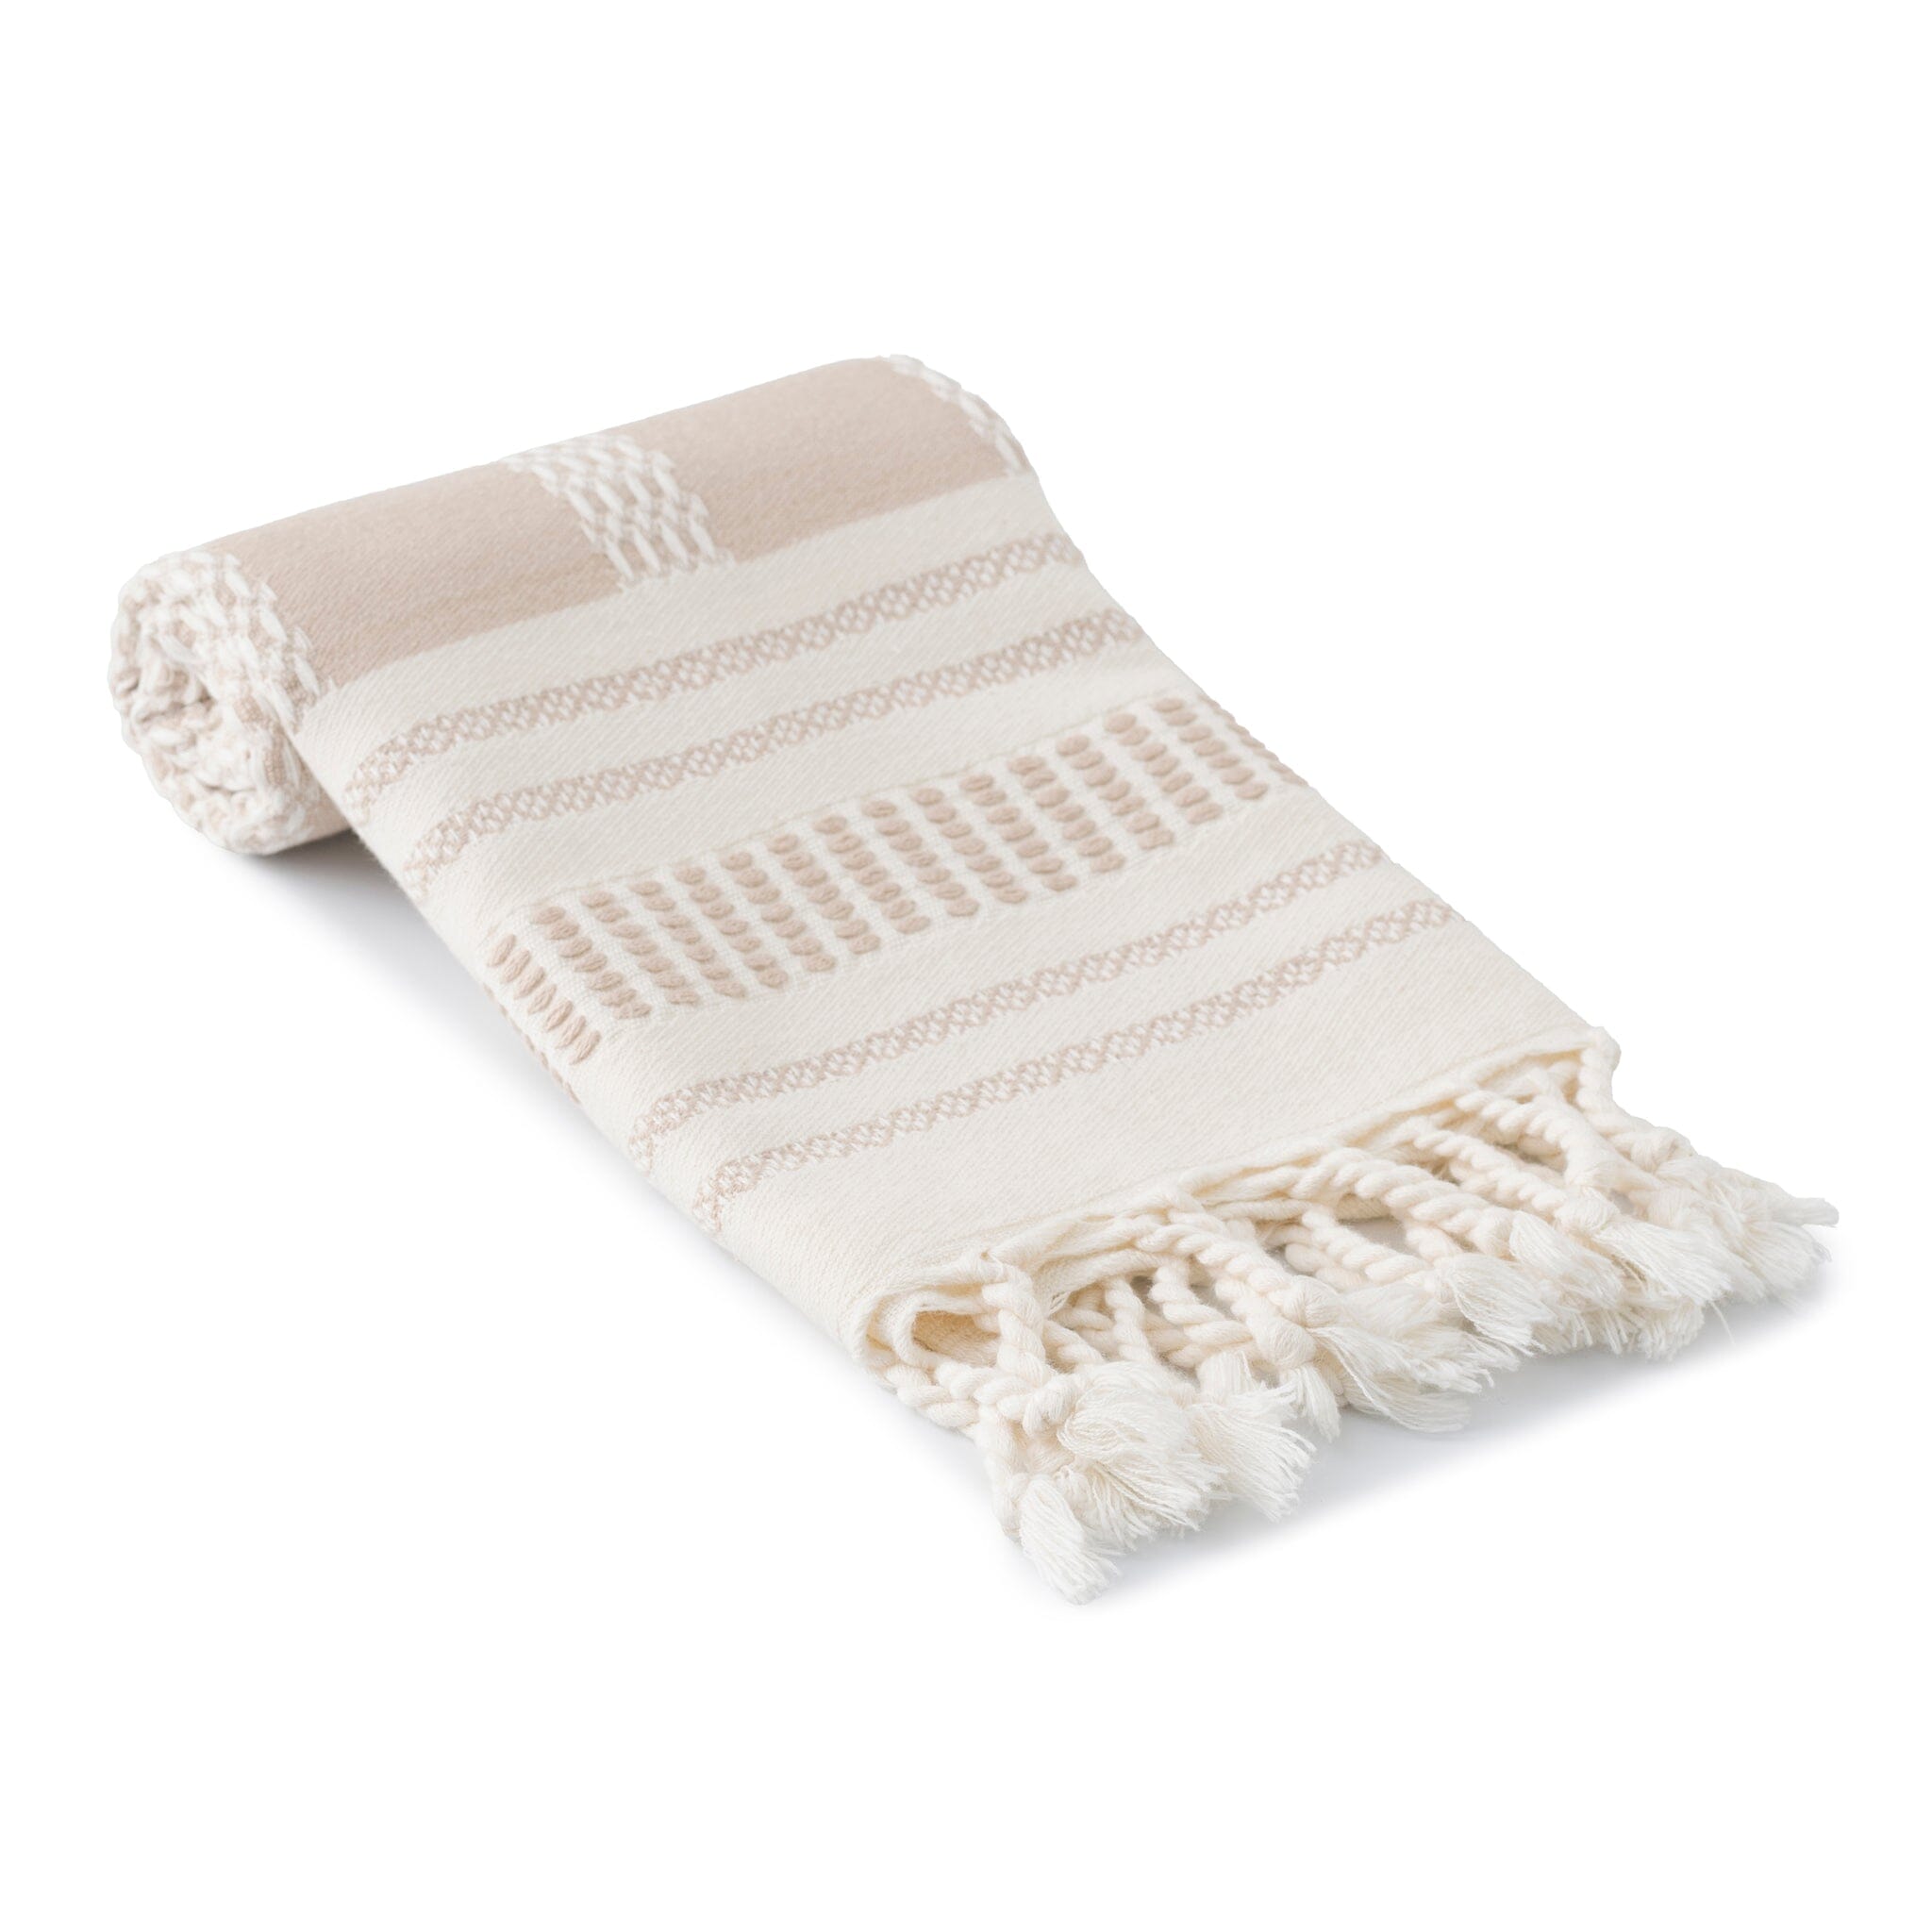 Green Striped Dish Towel with Fringe + Reviews